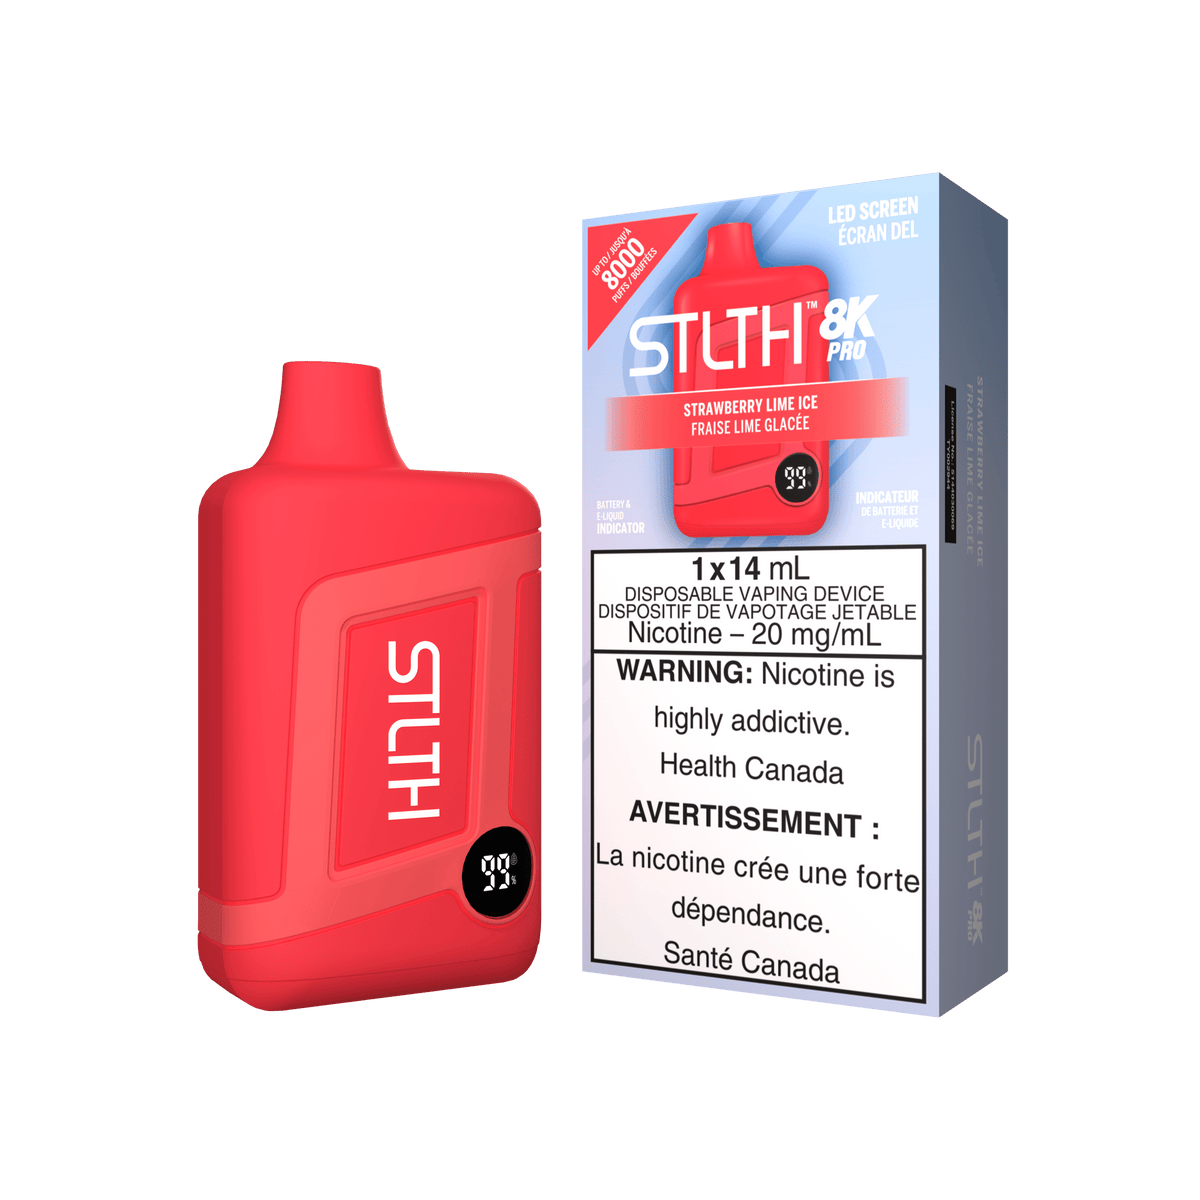 STLTH 8K Pro - Strawberry Lime Ice Disposable Vape available on Canada online vape shop